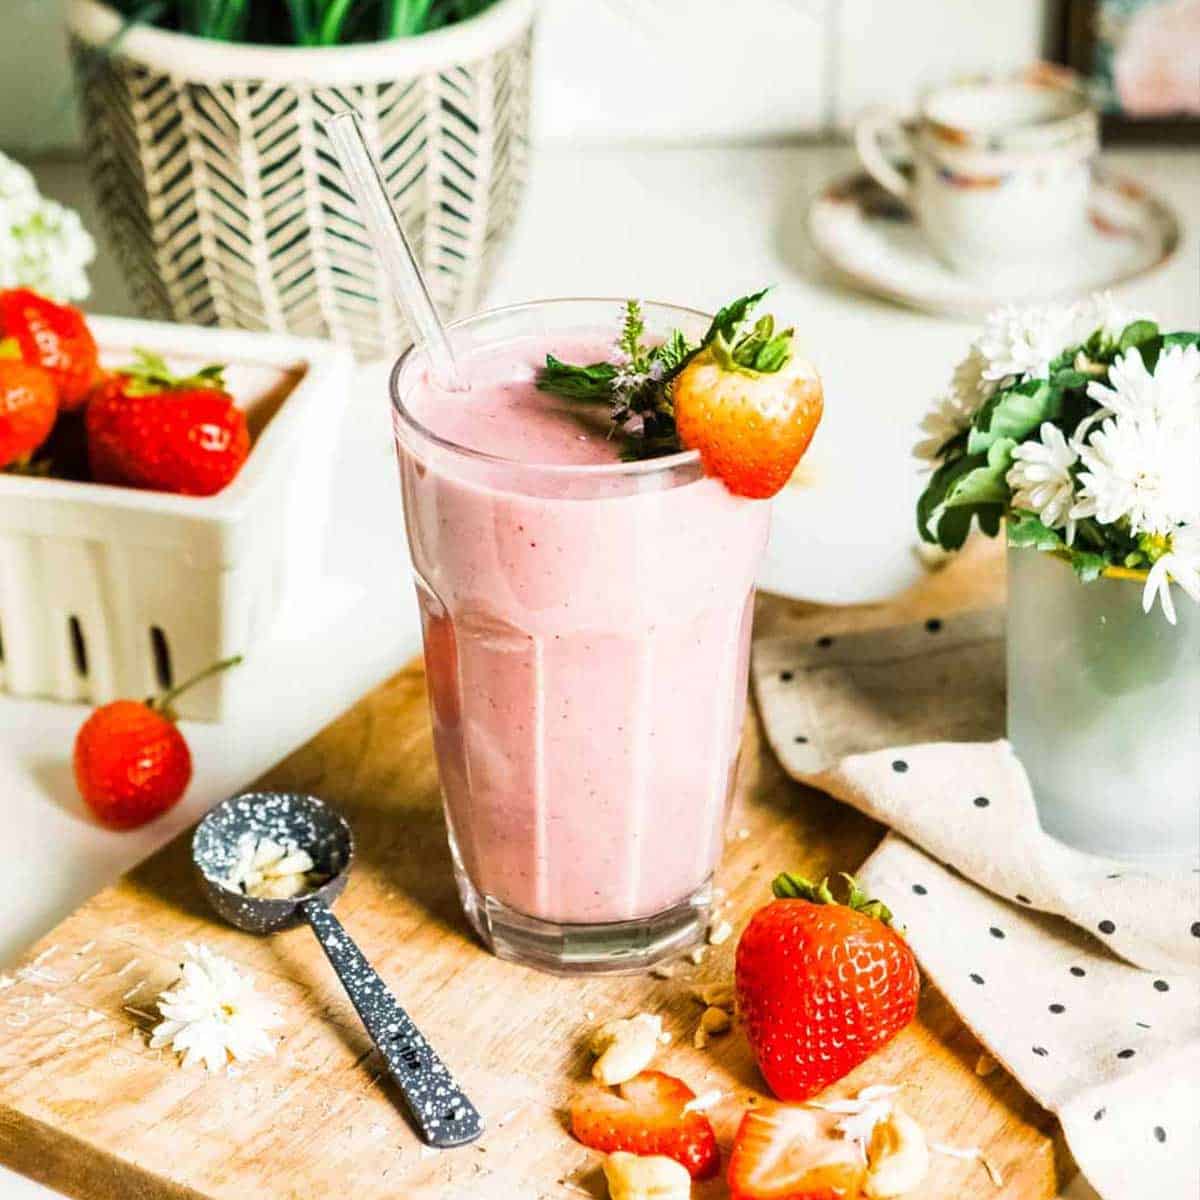 strawberry smoothie in glass with fresh strawberry as garnish.